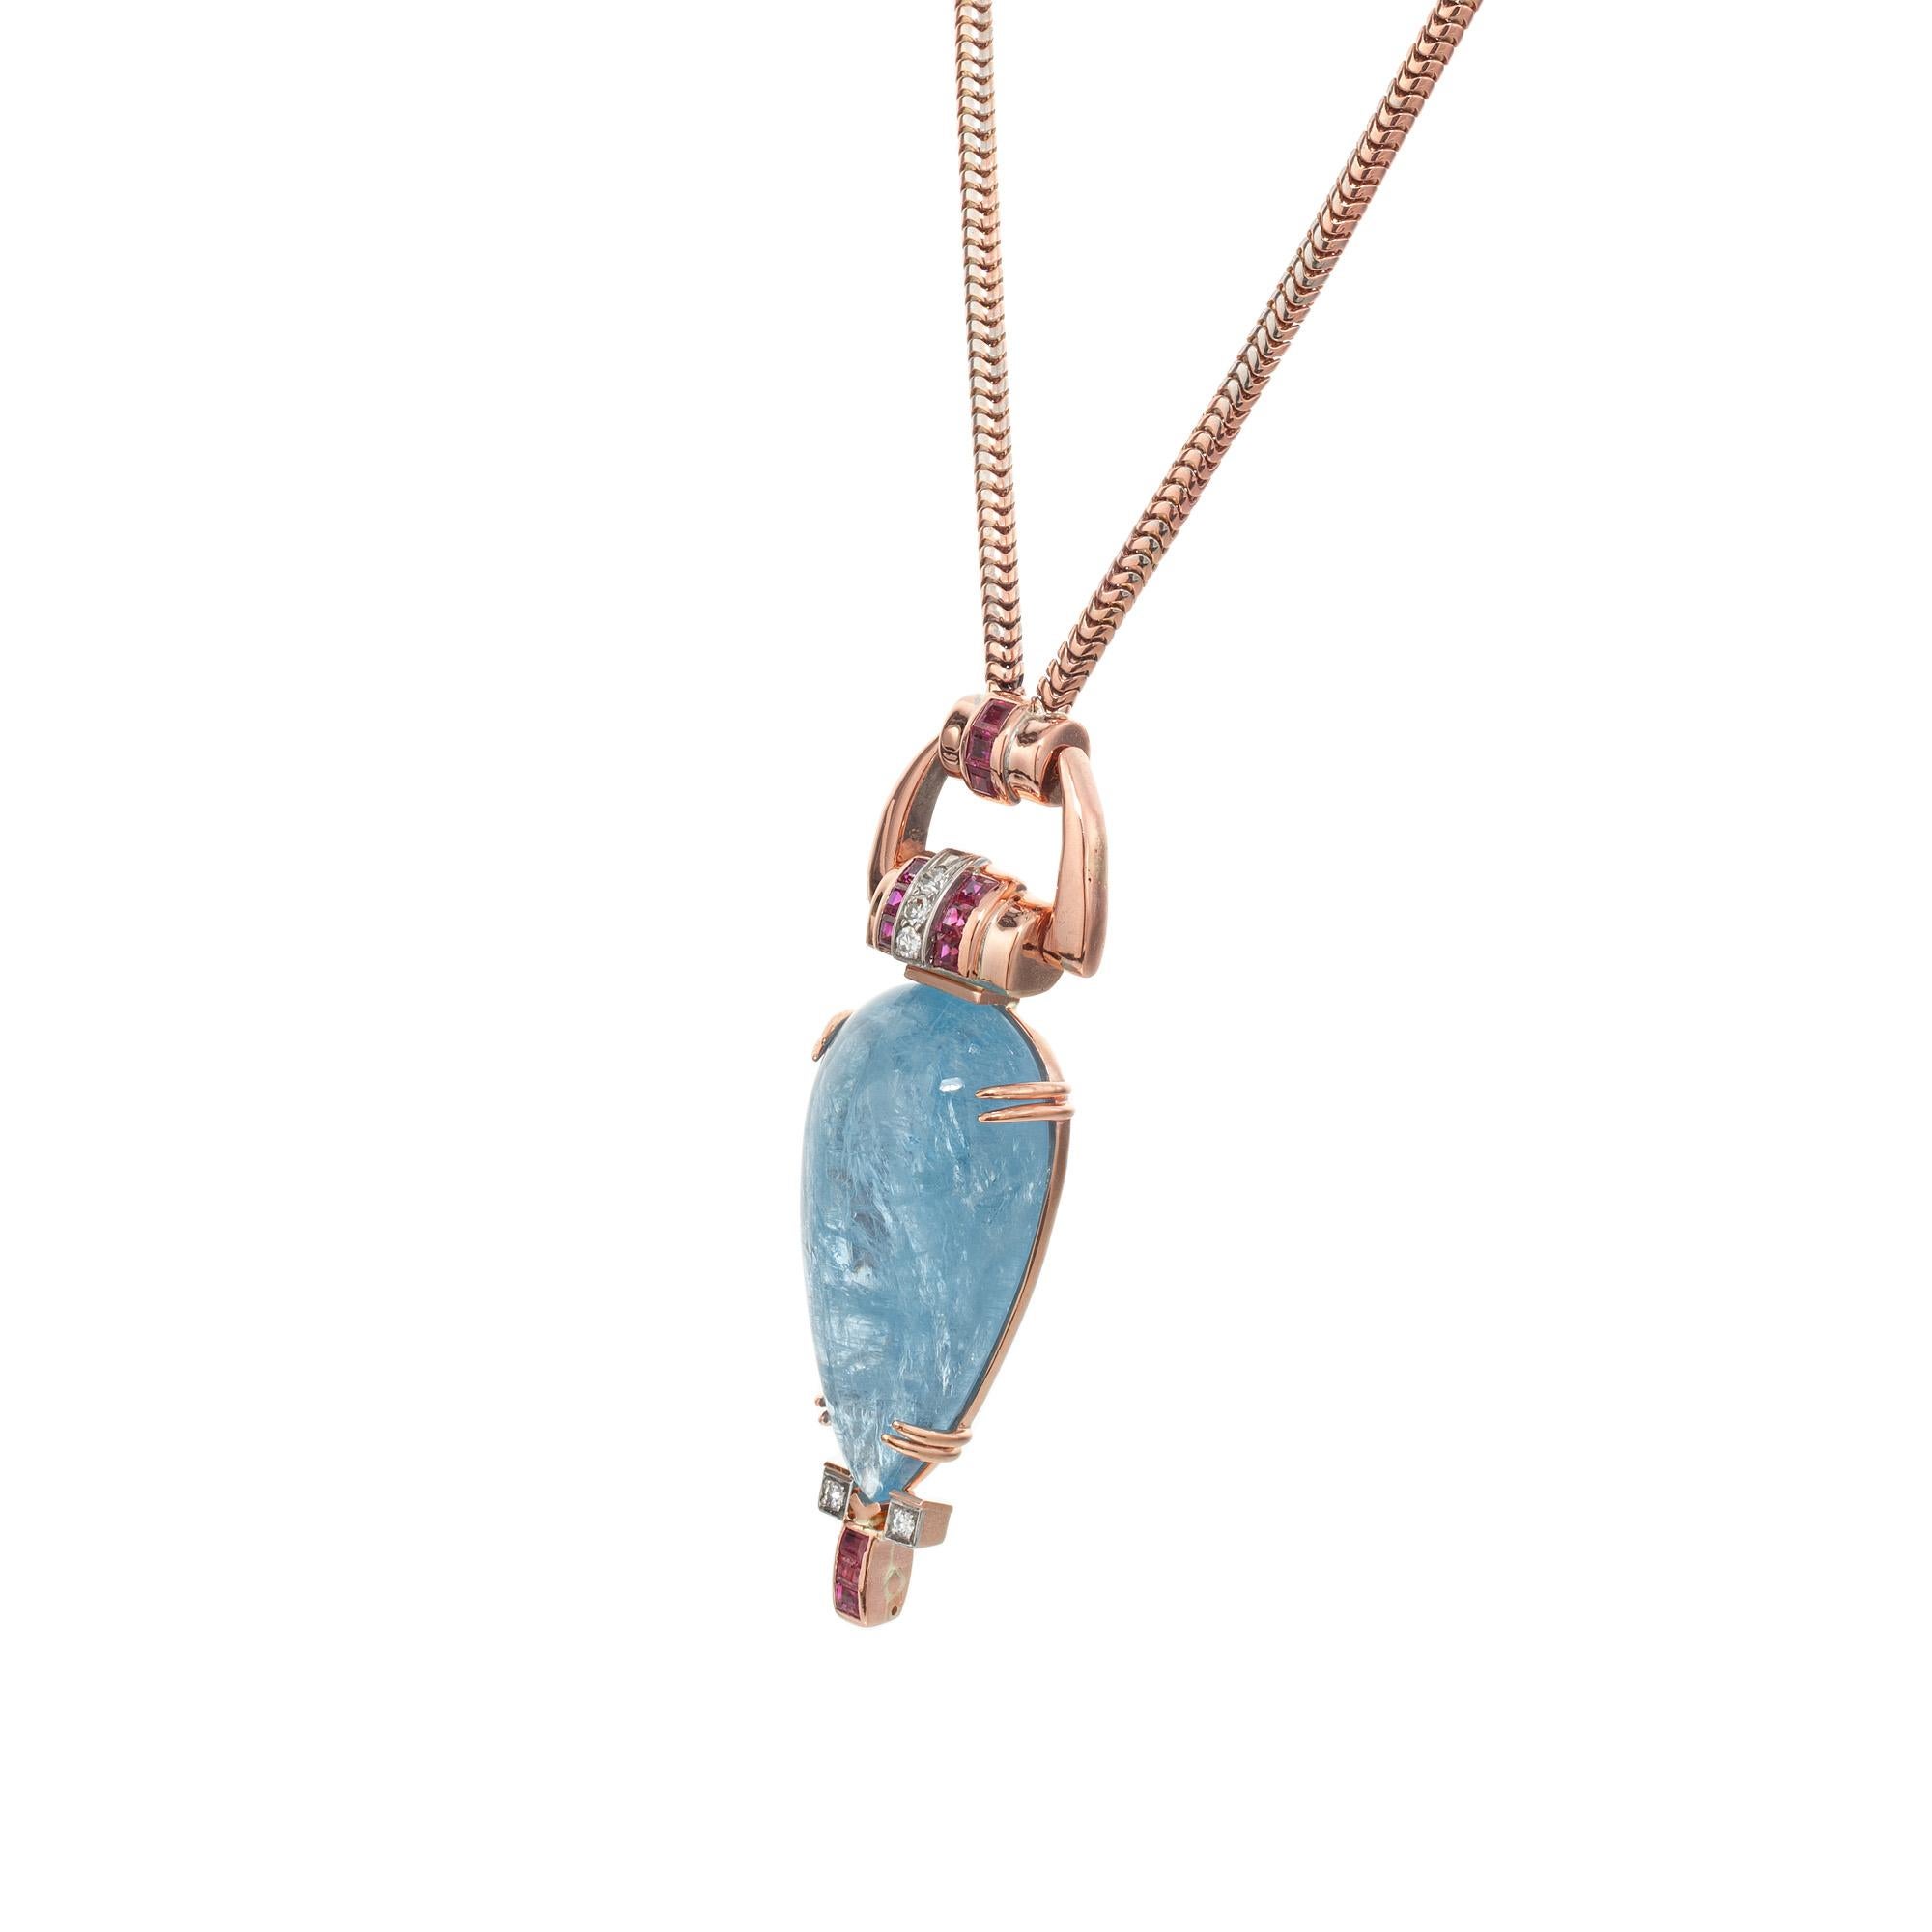 61.58 Carat Pear Aquamarine Ruby Diamond Rose Gold Retro Pendent Necklace  In Good Condition For Sale In Stamford, CT